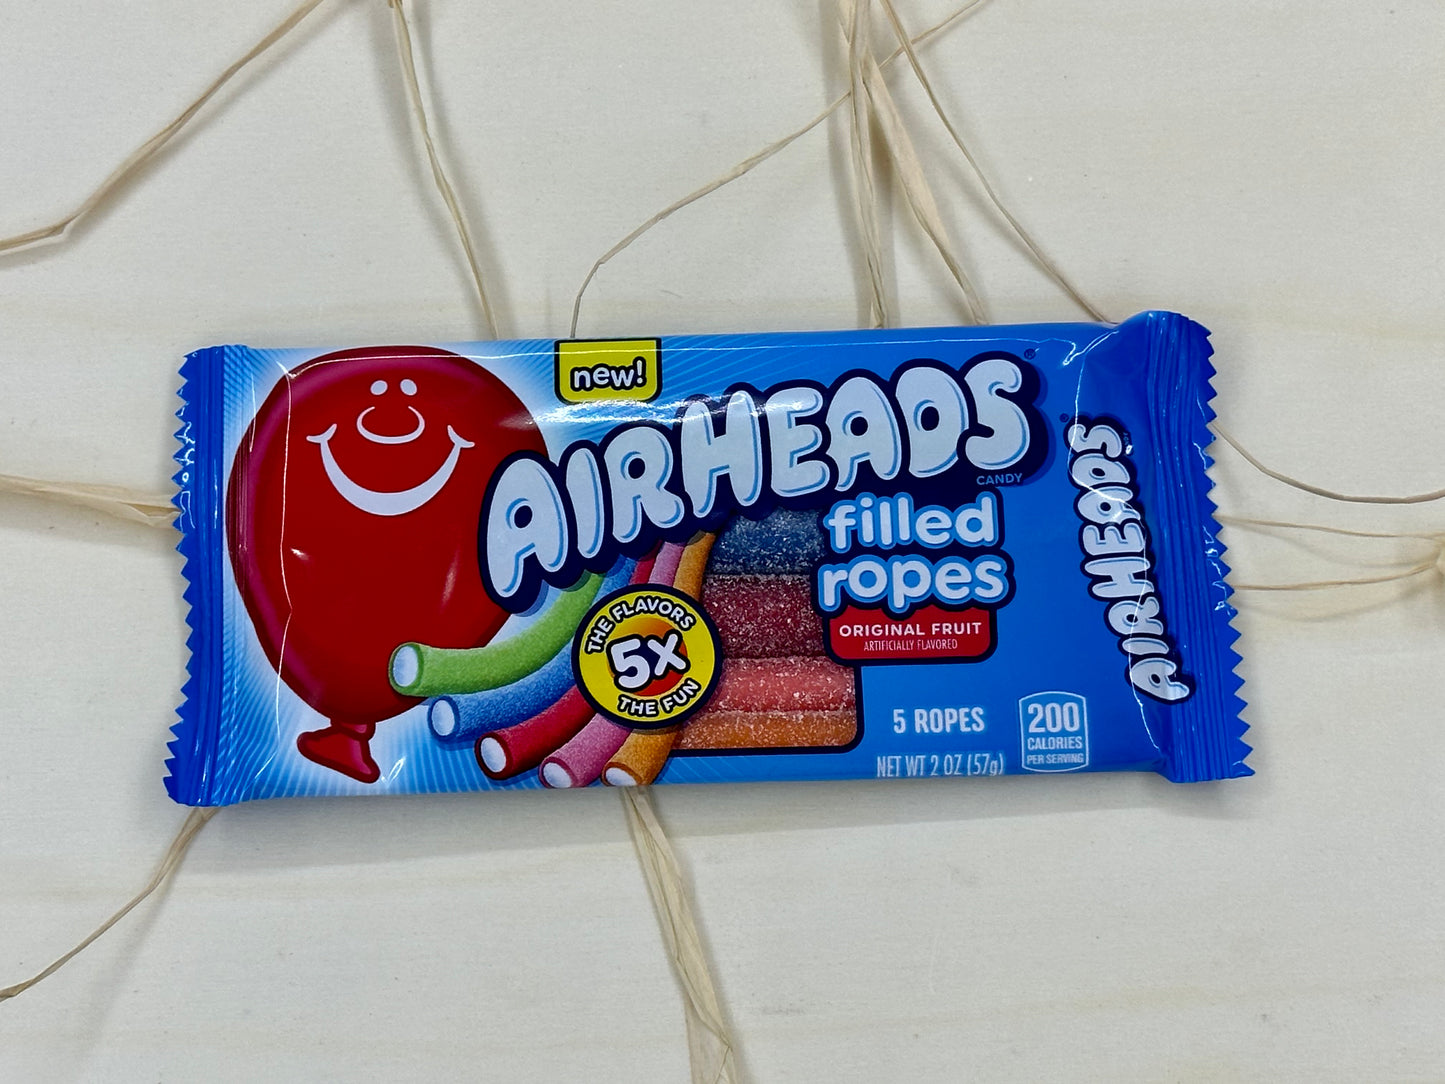 AirHeads Filled Ropes 57g